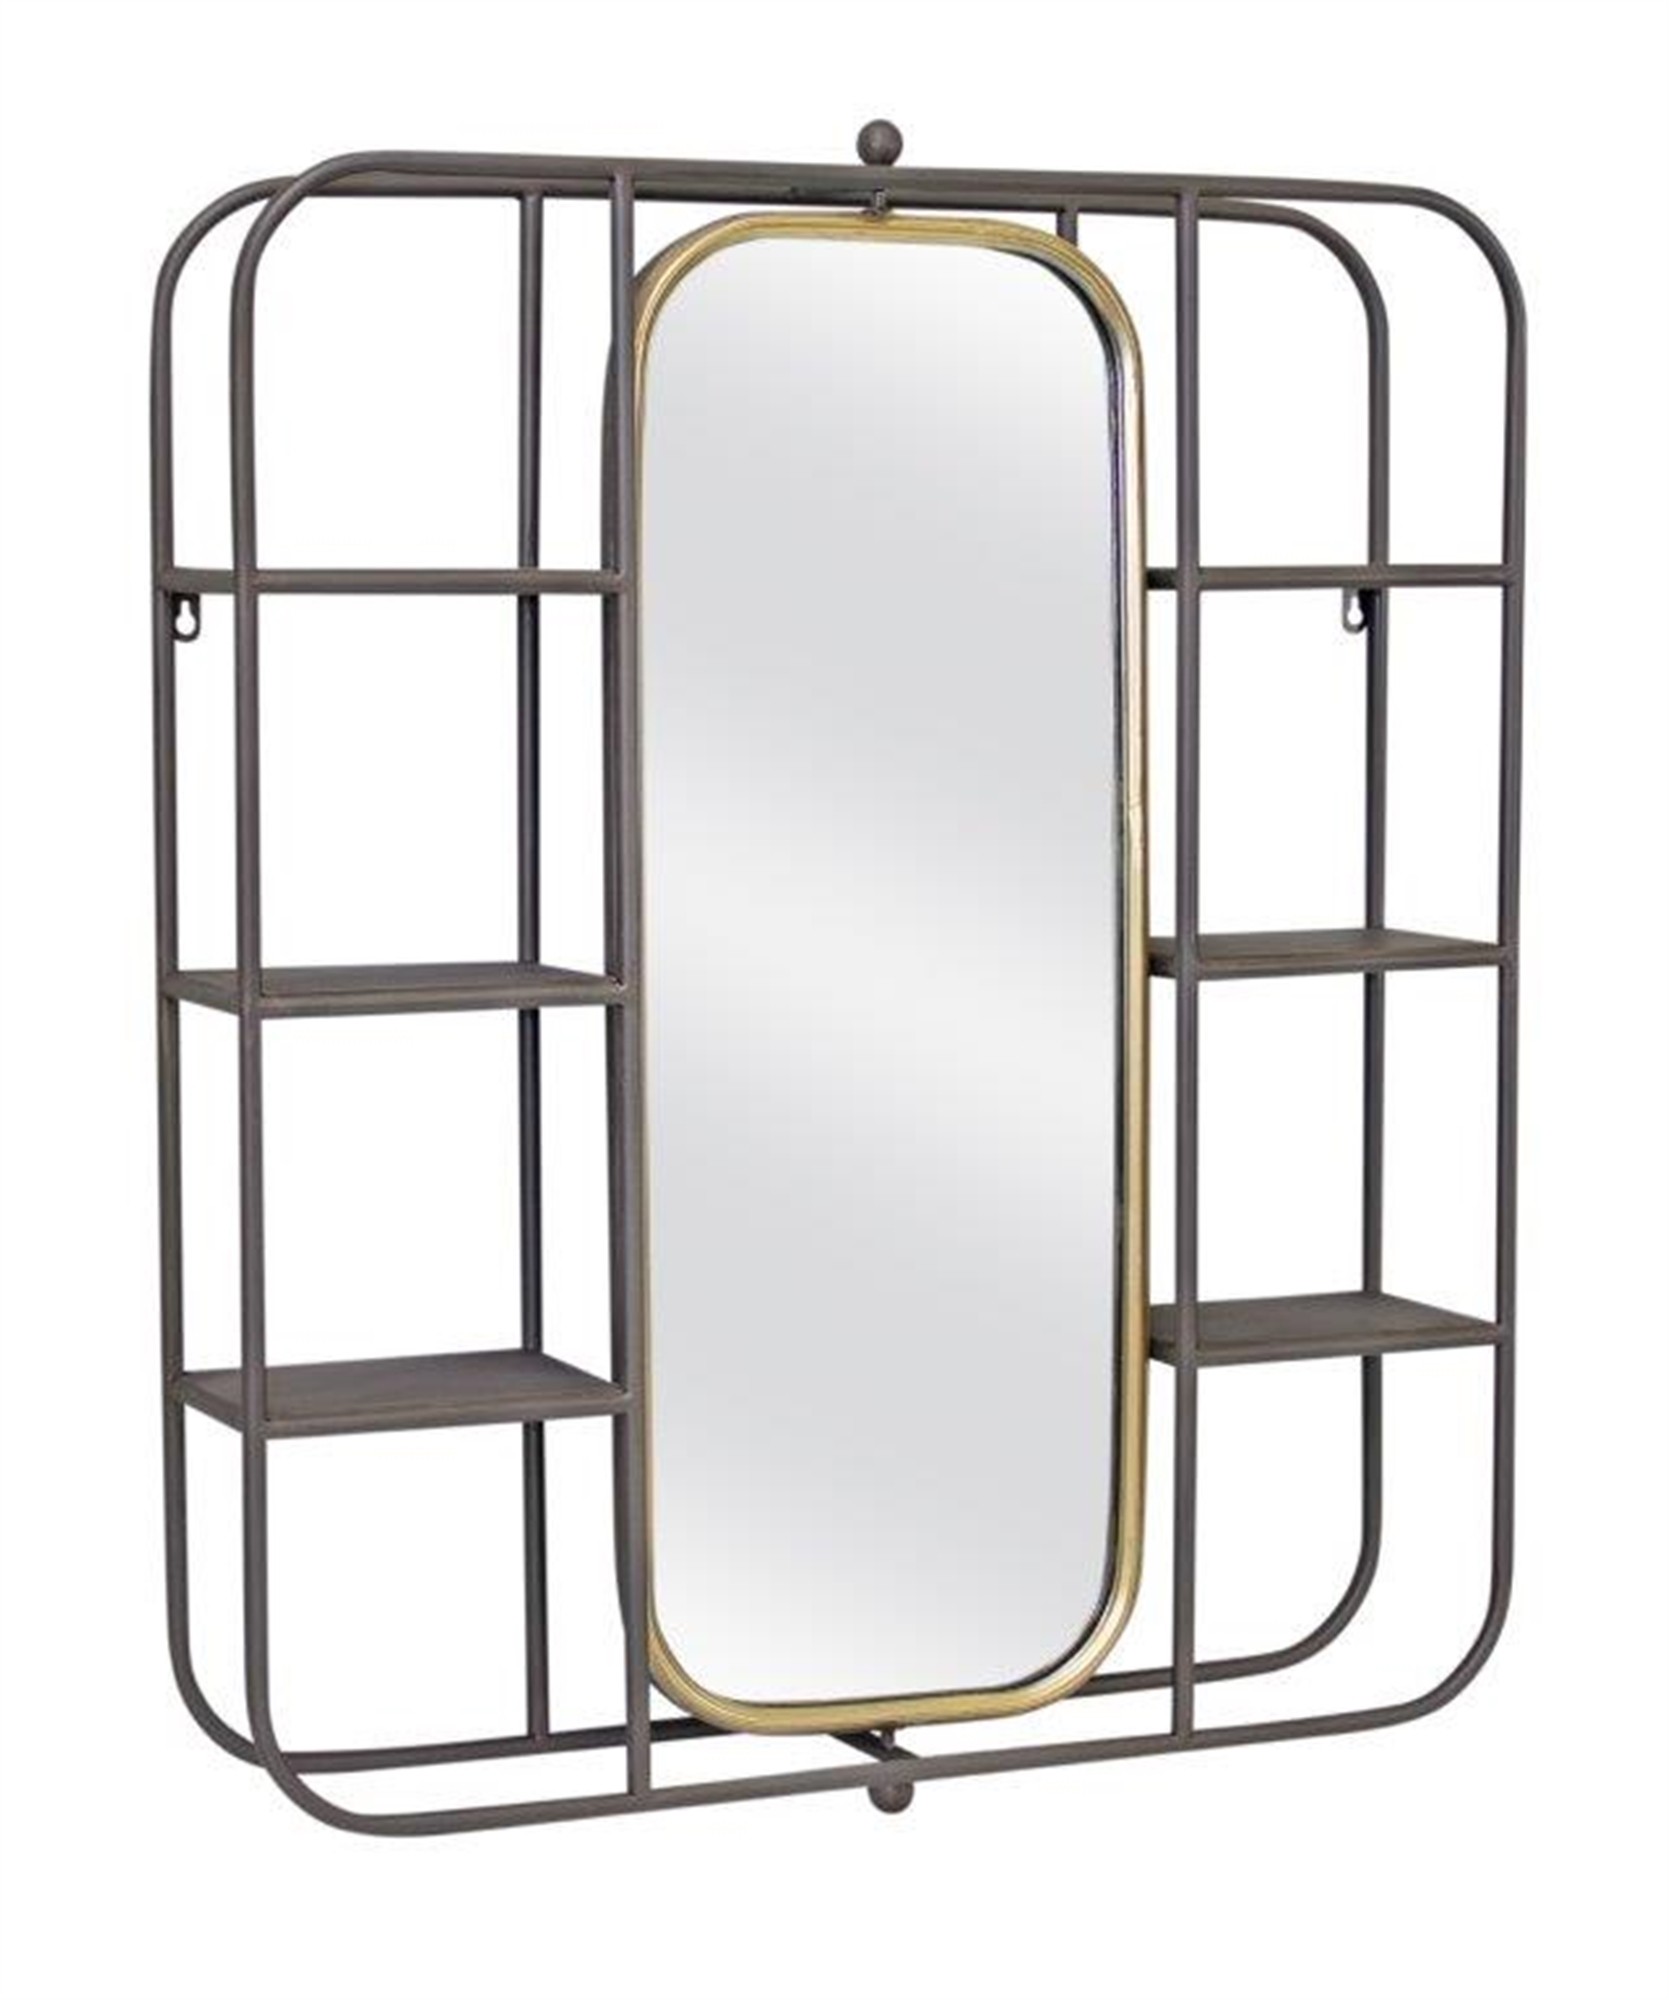 Wall Mirror with Shelves 27.5"L x 33.5"H Iron/Glass